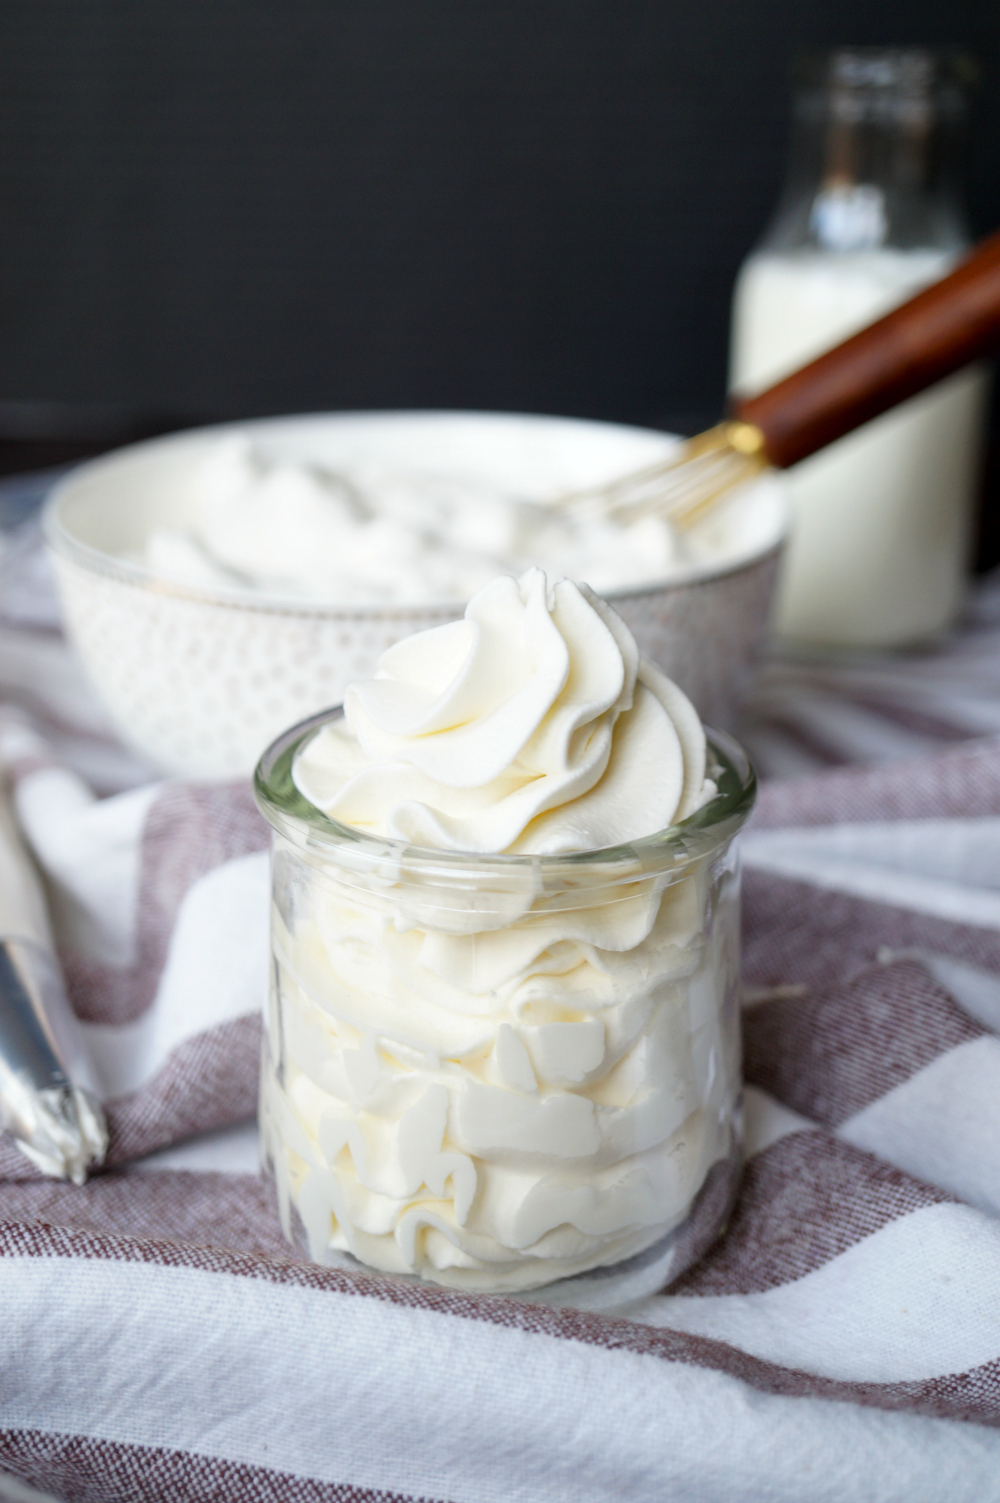 Easy 5 minute 4 Ingredient Recipe for Stabilized Whipped Cream